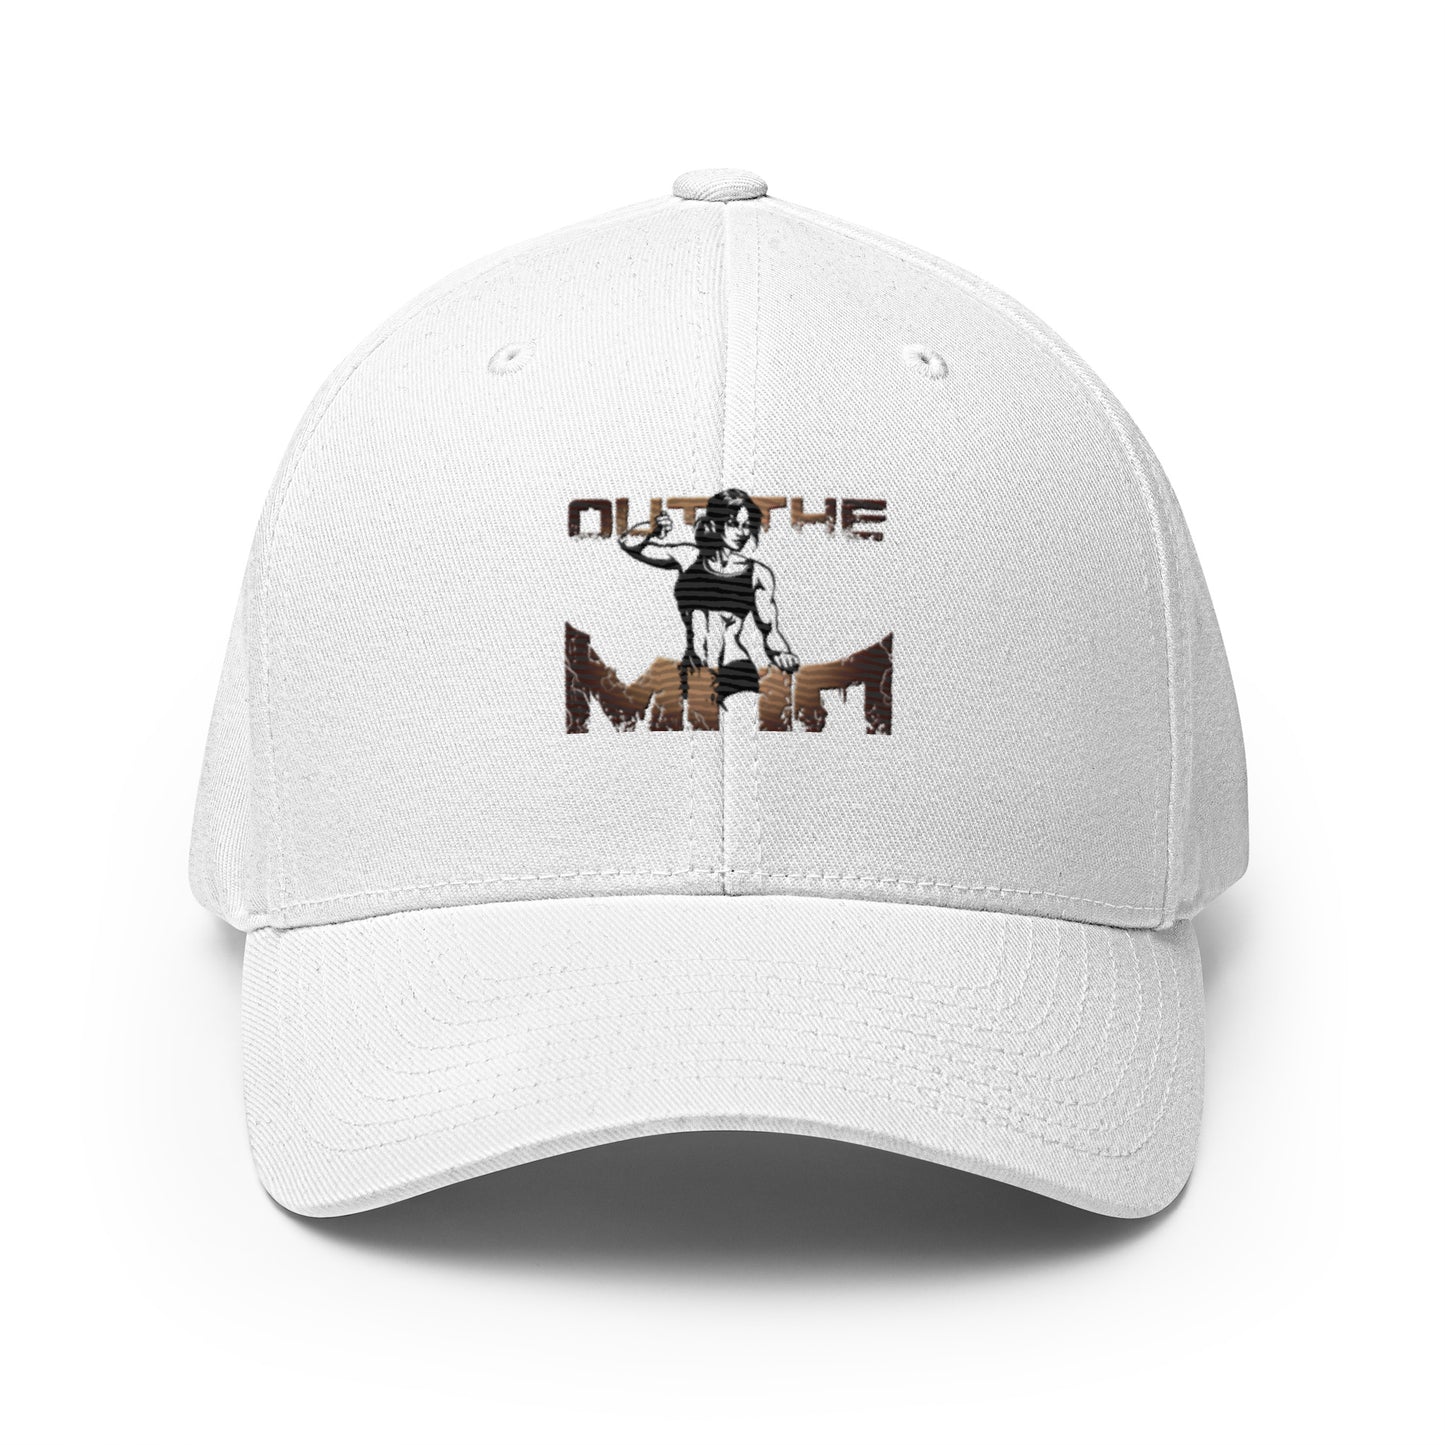 Fitness " out the mud" female Ball cap